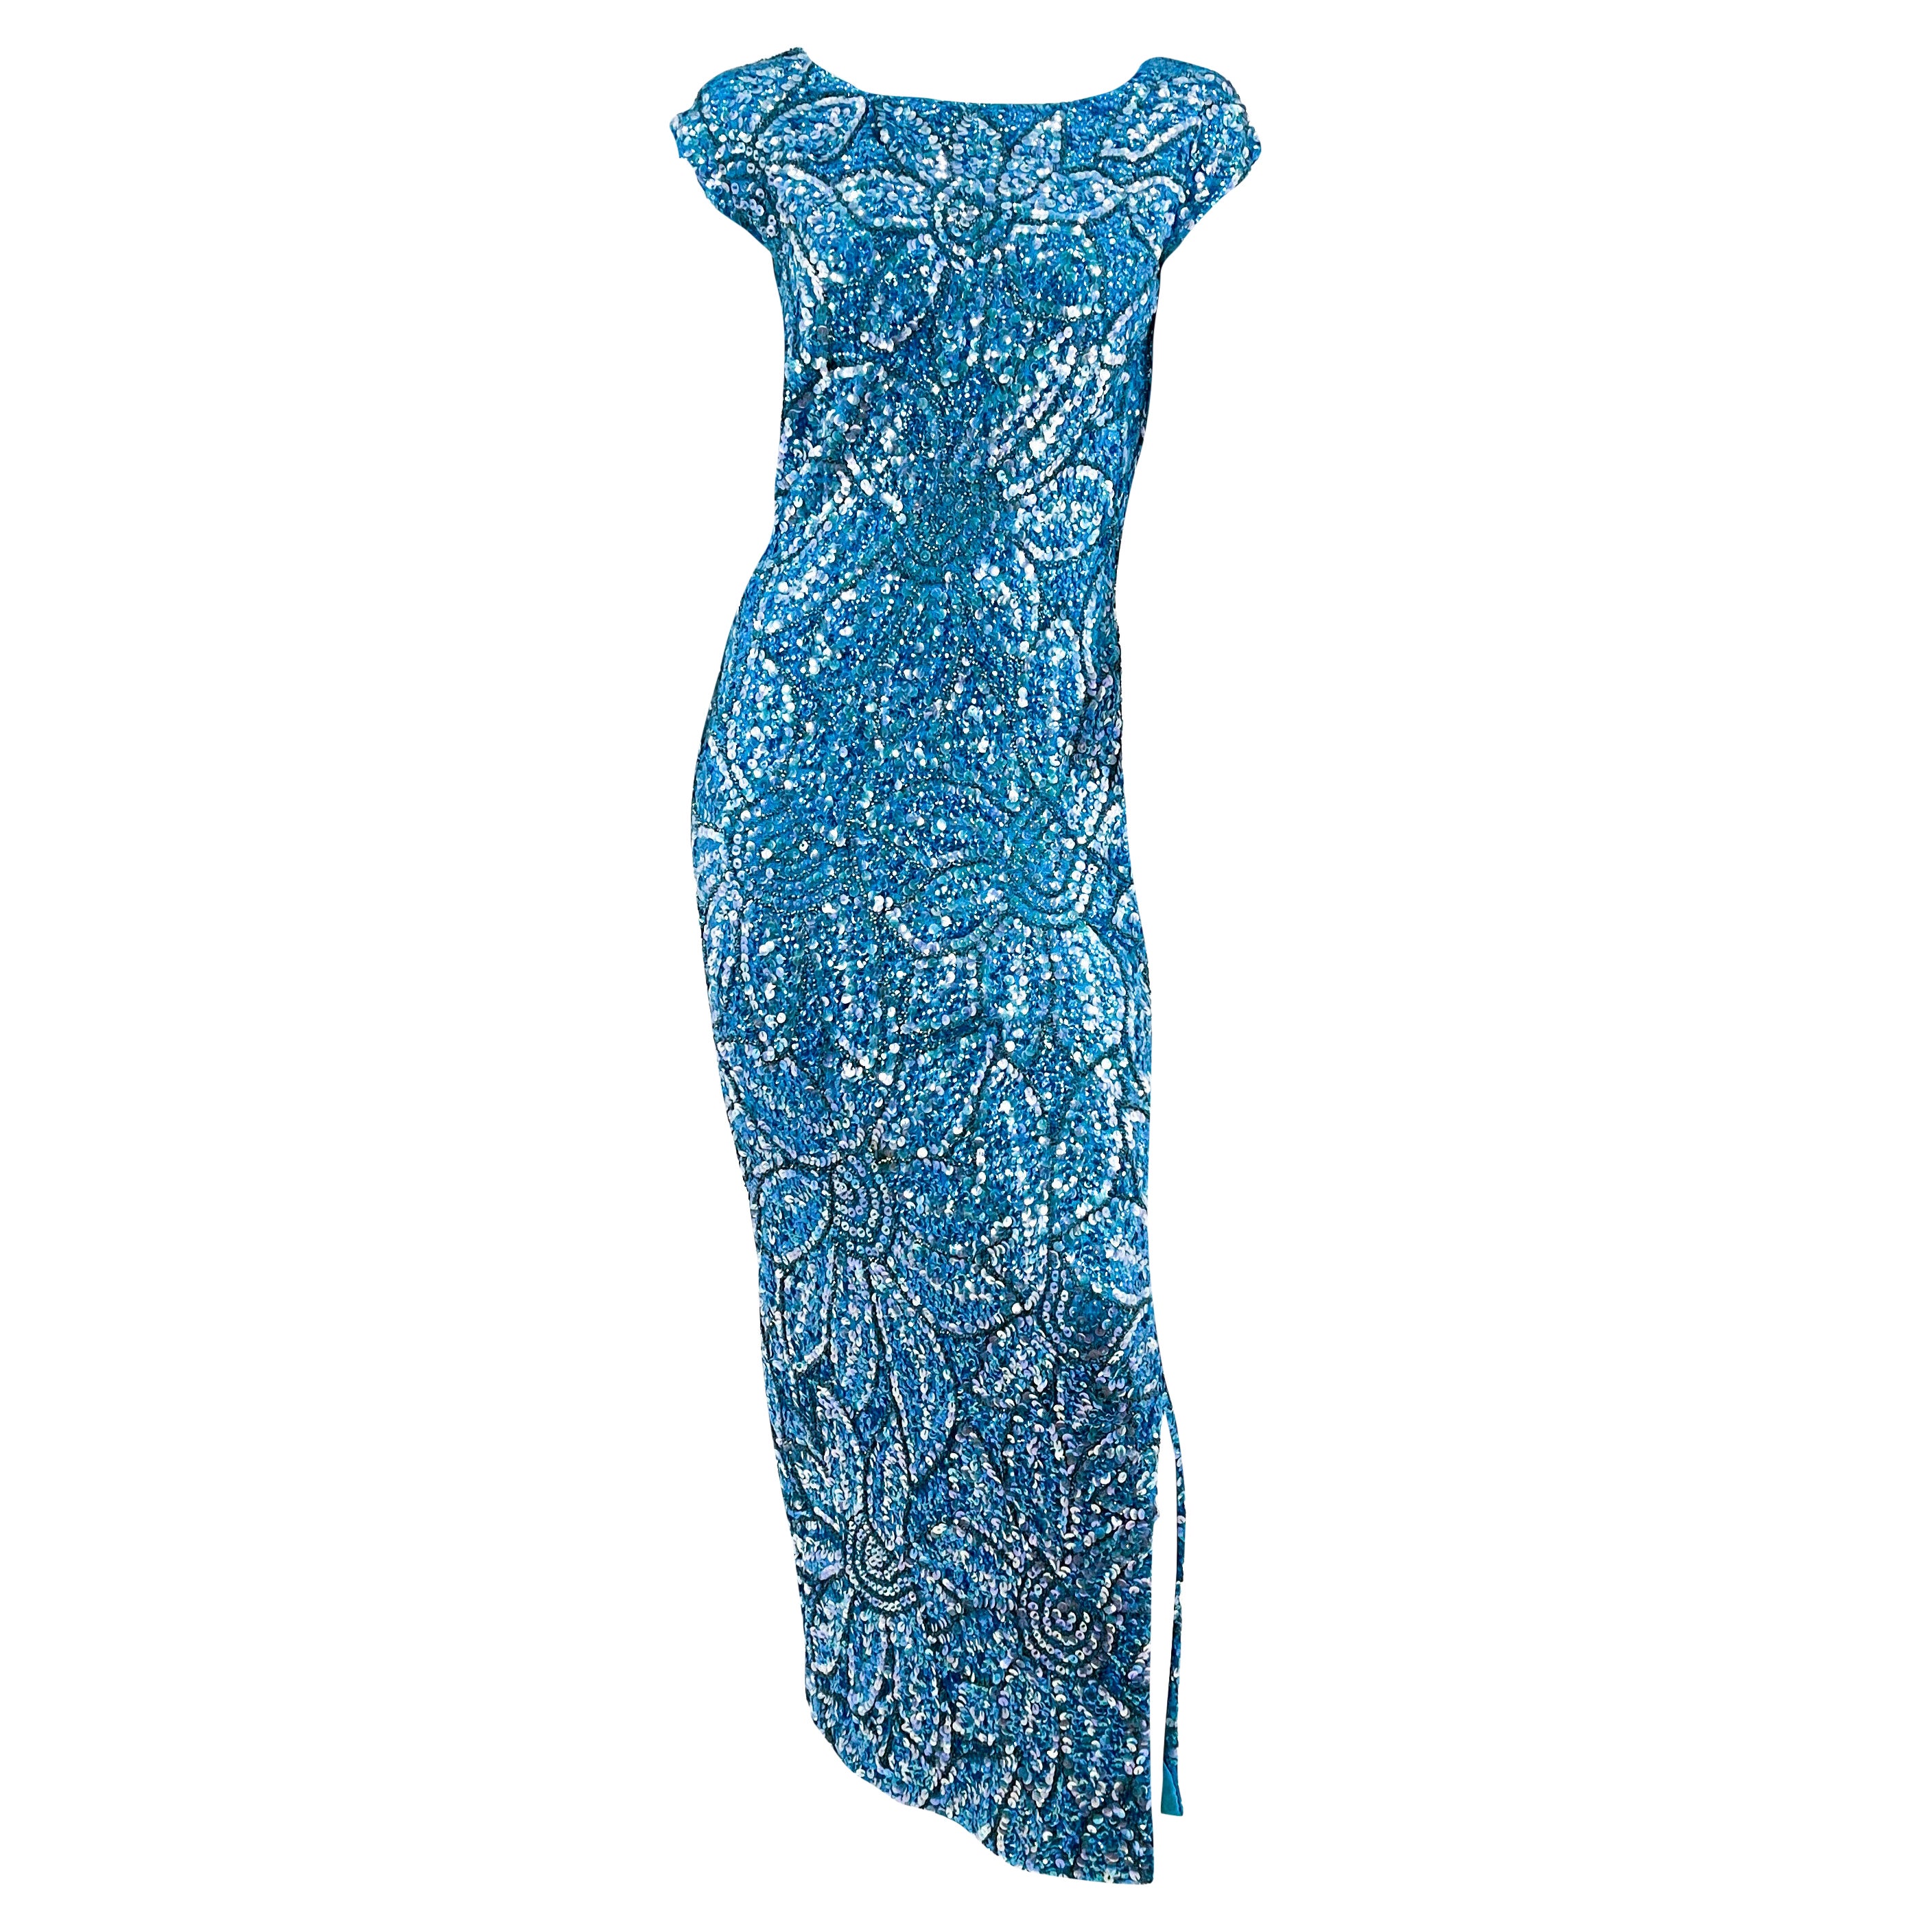 1950s Imperial Aqua Blue Sequin and Beaded Knit Dress For Sale